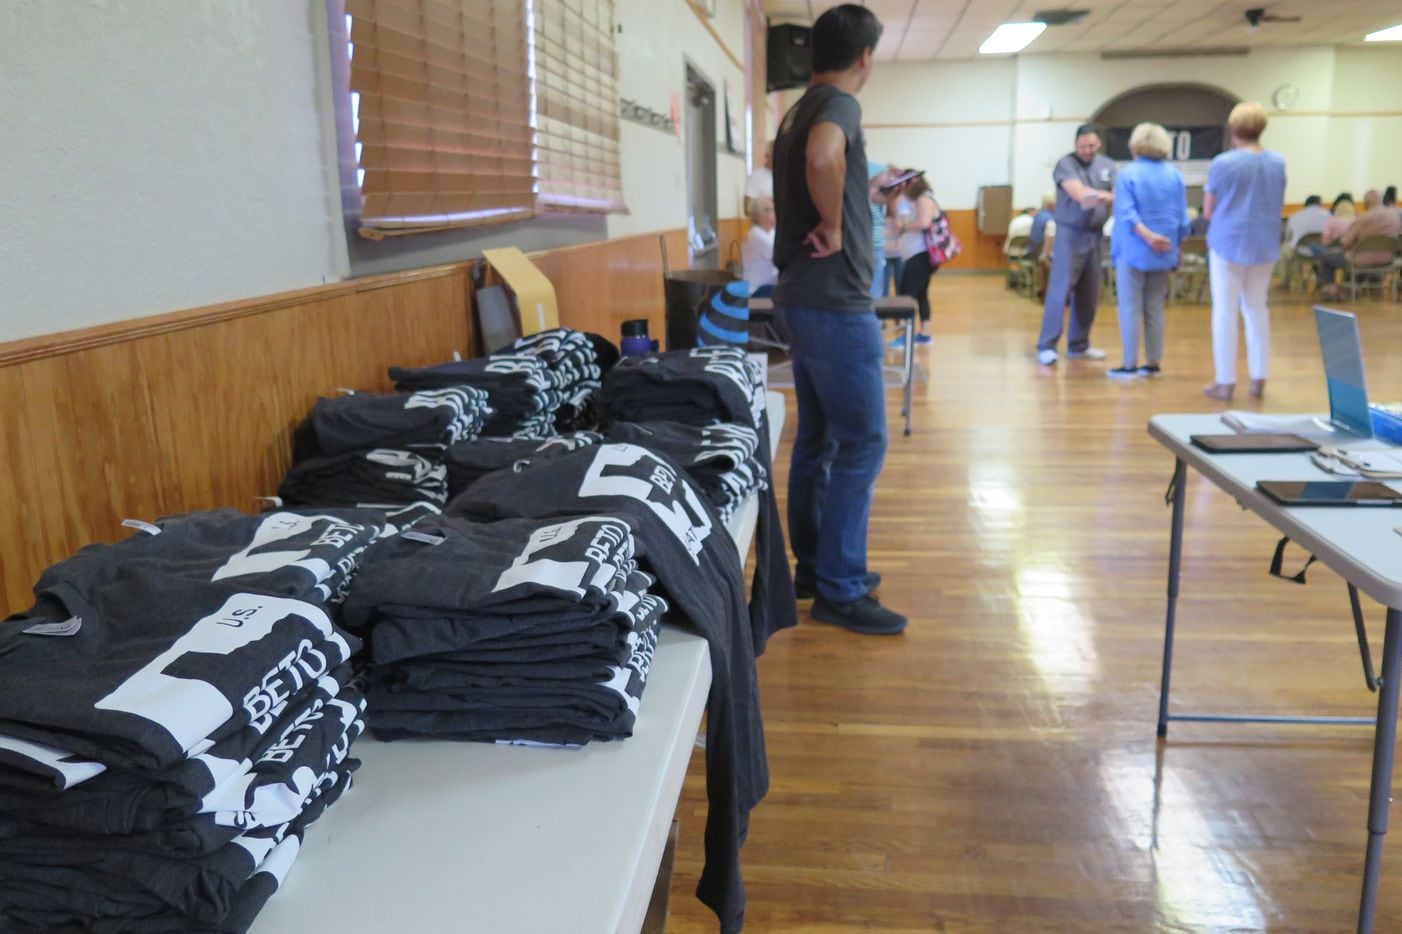 O'Rourke campaign workers brought more T-shirts to sell in Fort Stockton, Texas, at $25...